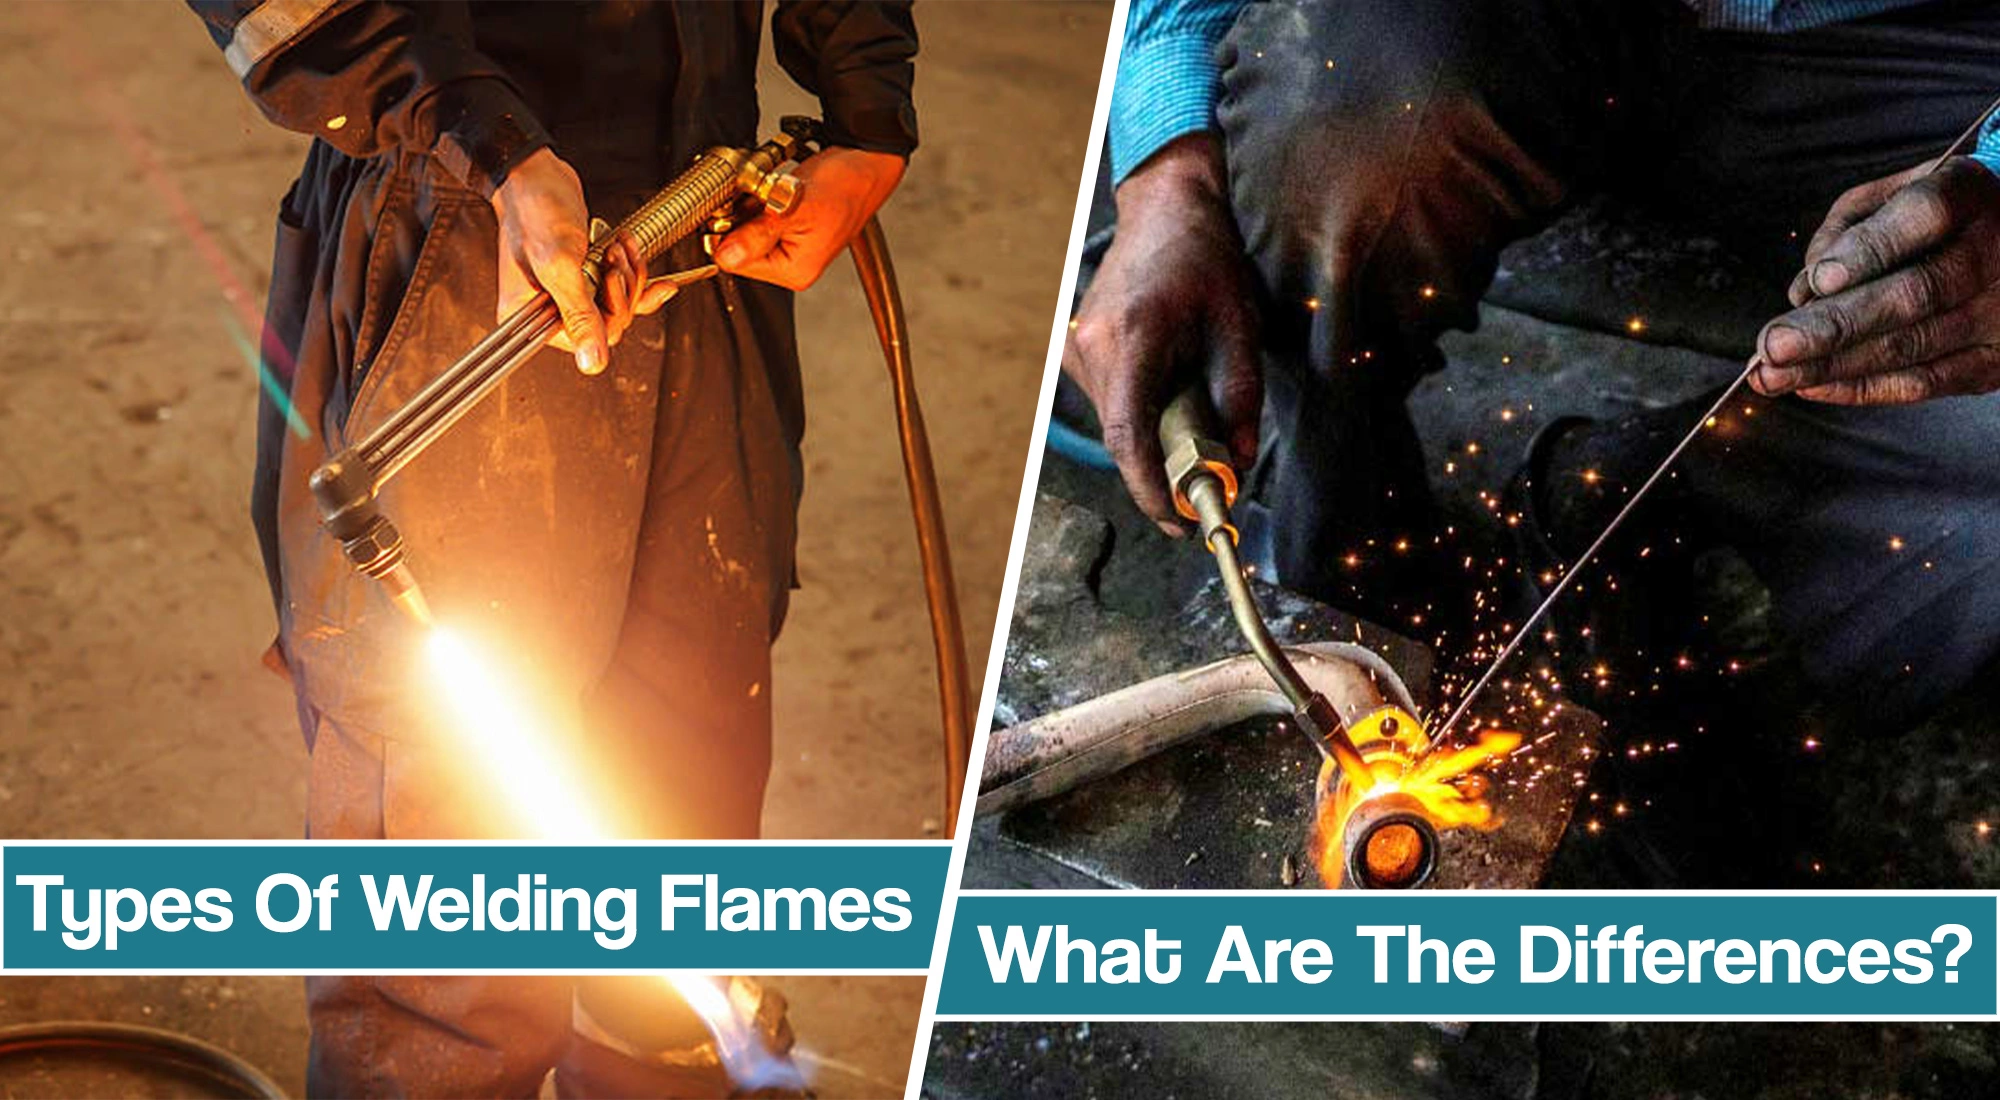 Types Of Welding Flames – Properties, Characteristics, and How To Distinguish Them